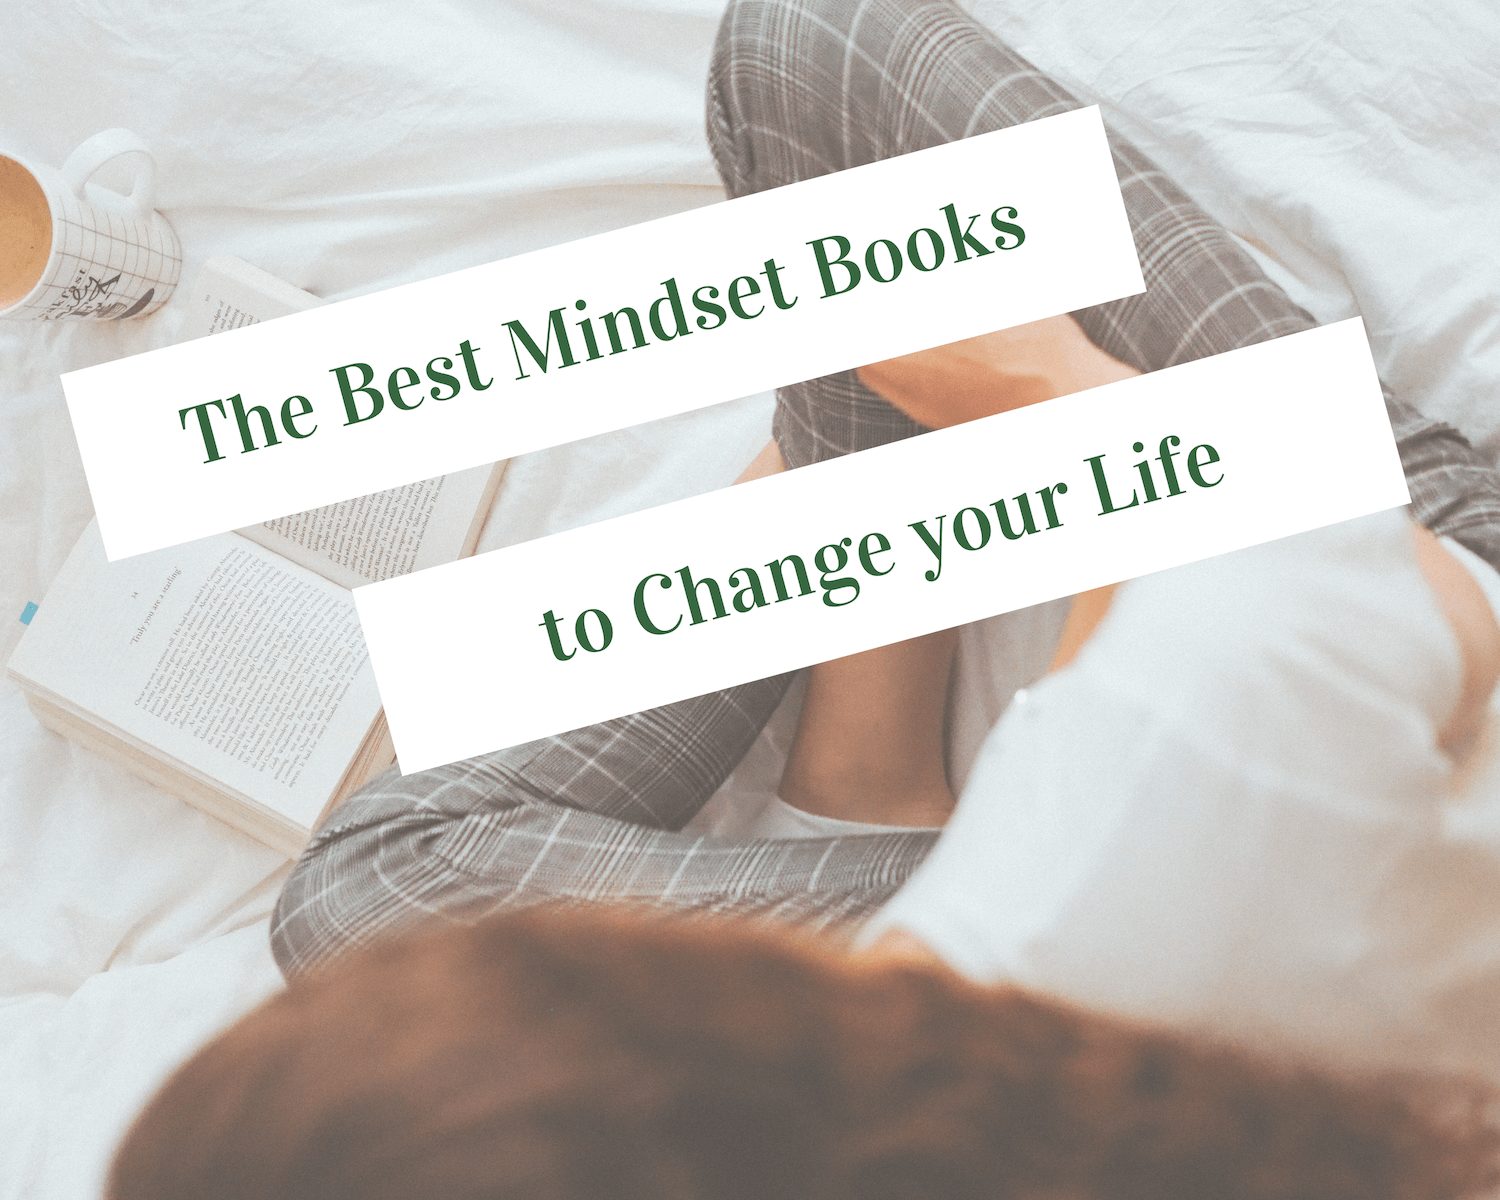 The best mindset books to change your life featured image